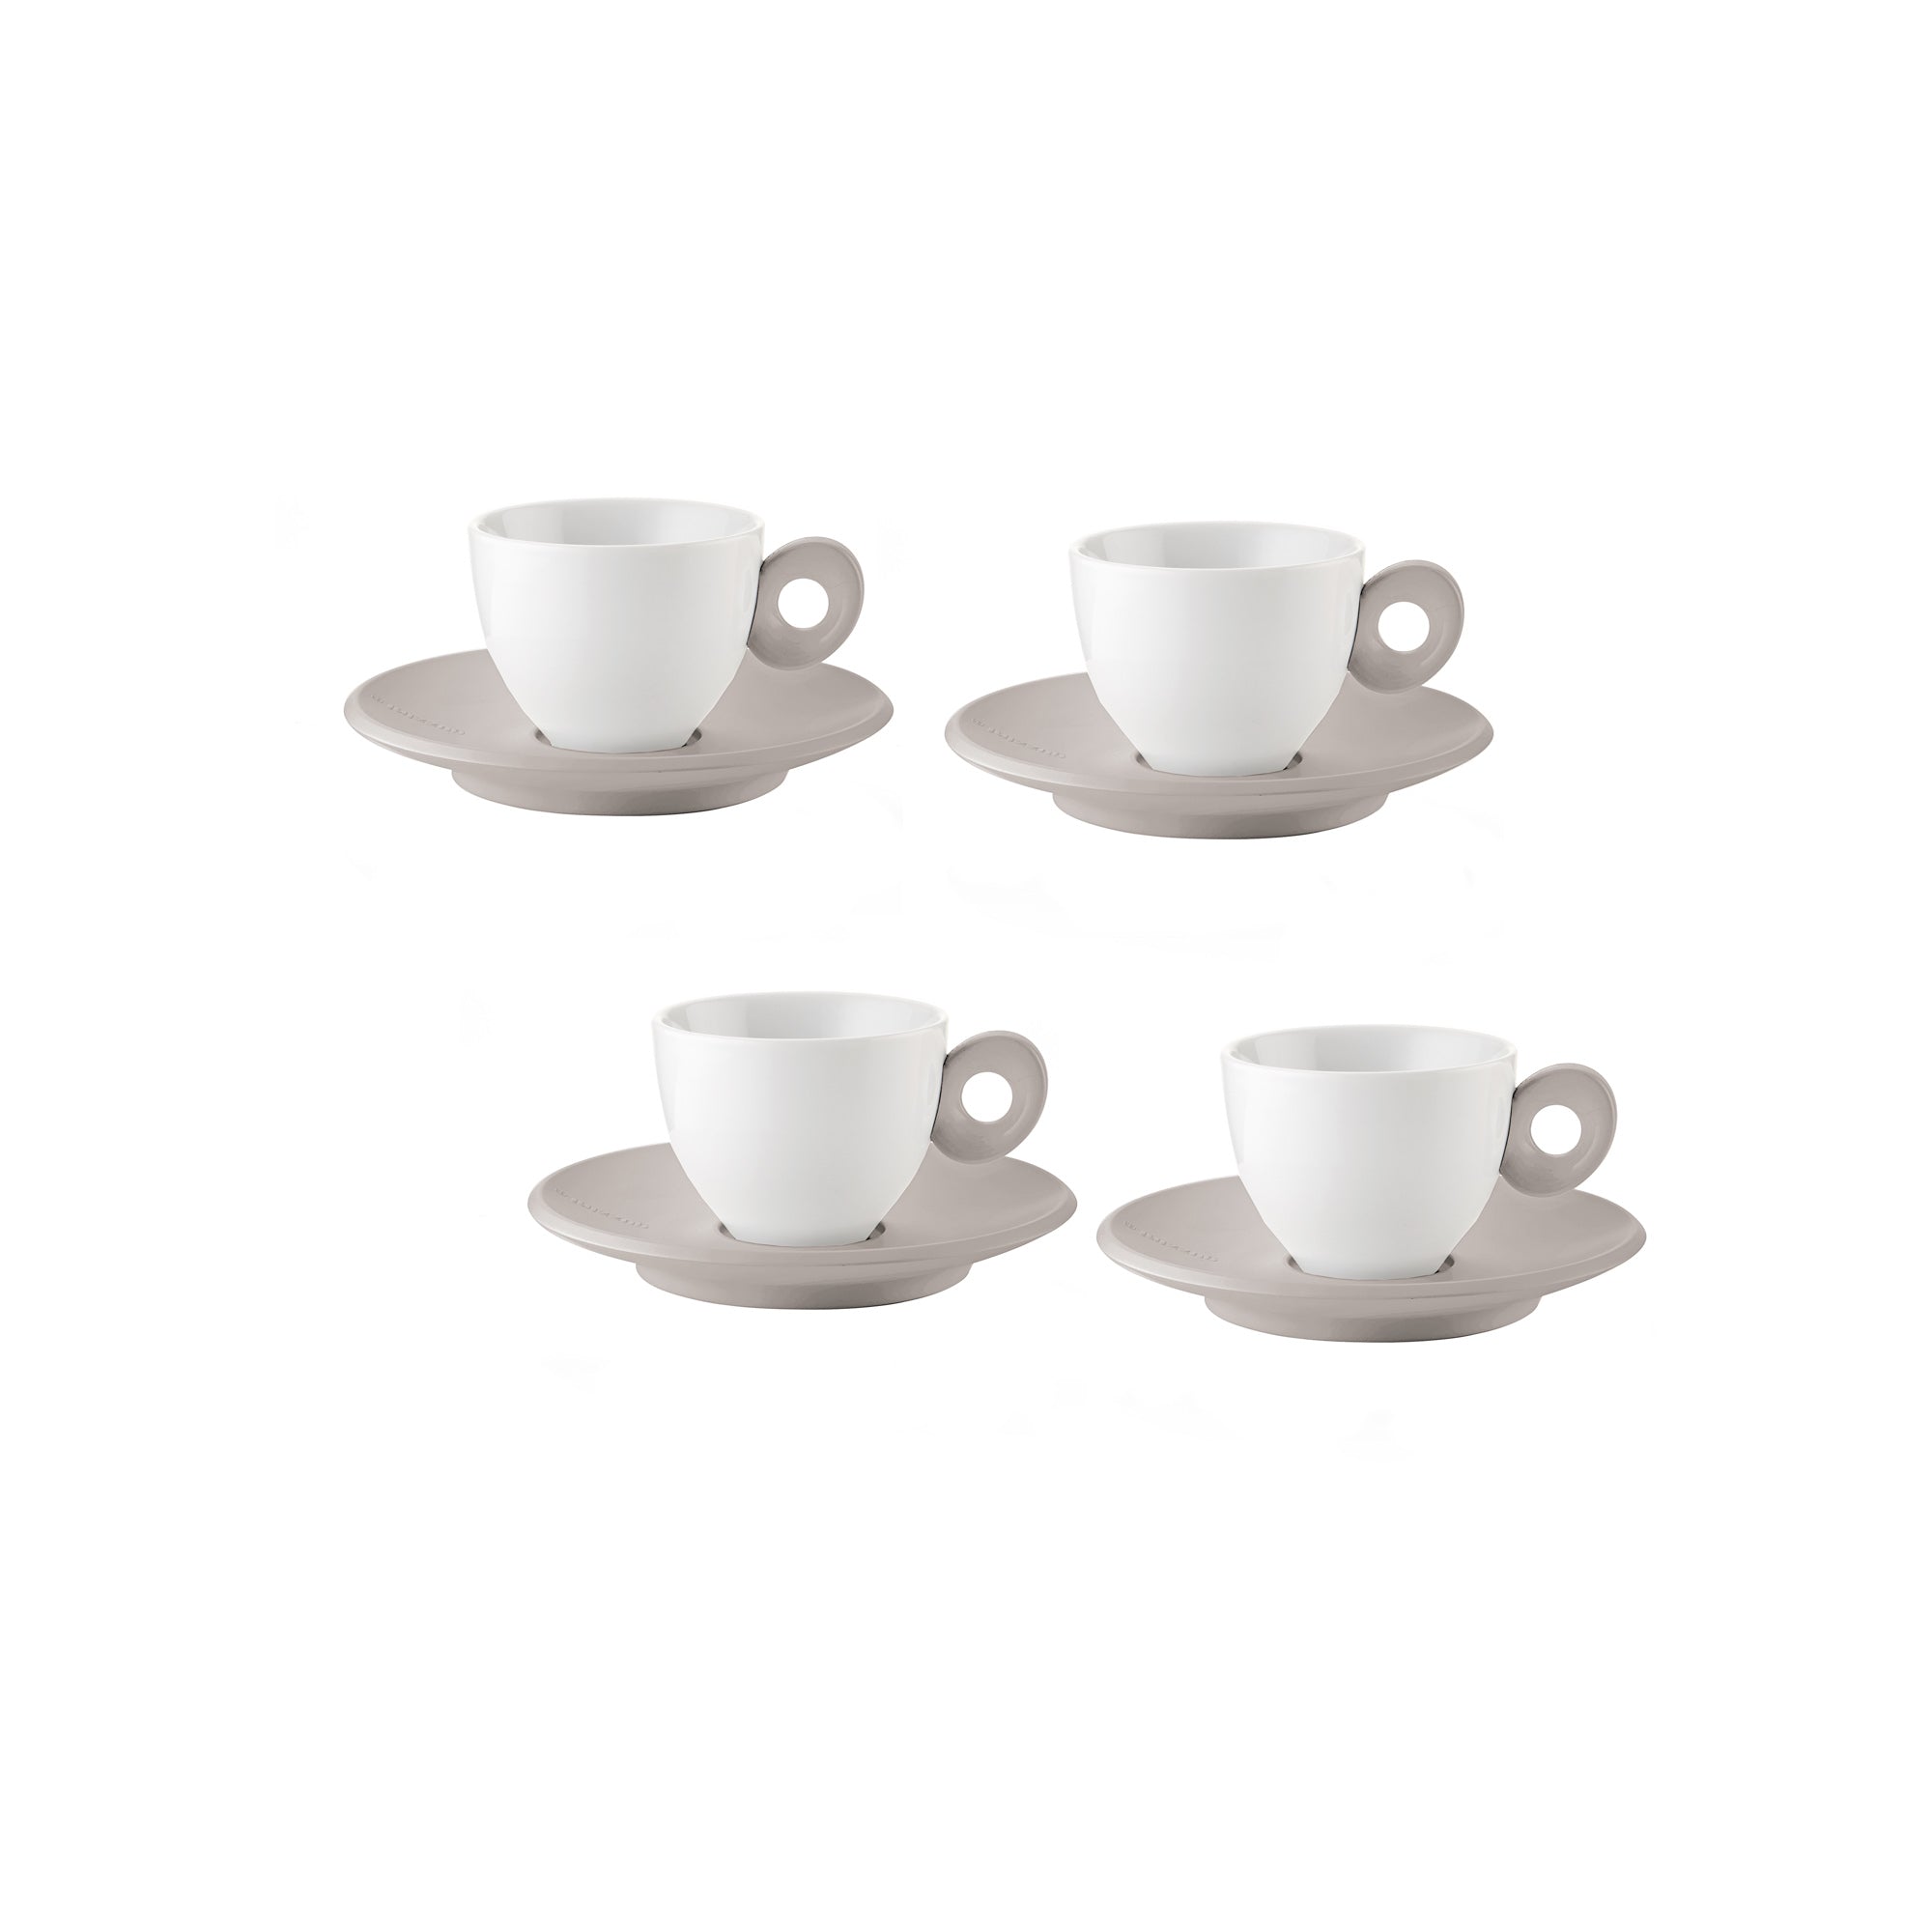 SET OF 4 ESPRESSO CUPS WITH SAUCERS "EVERYDAY"